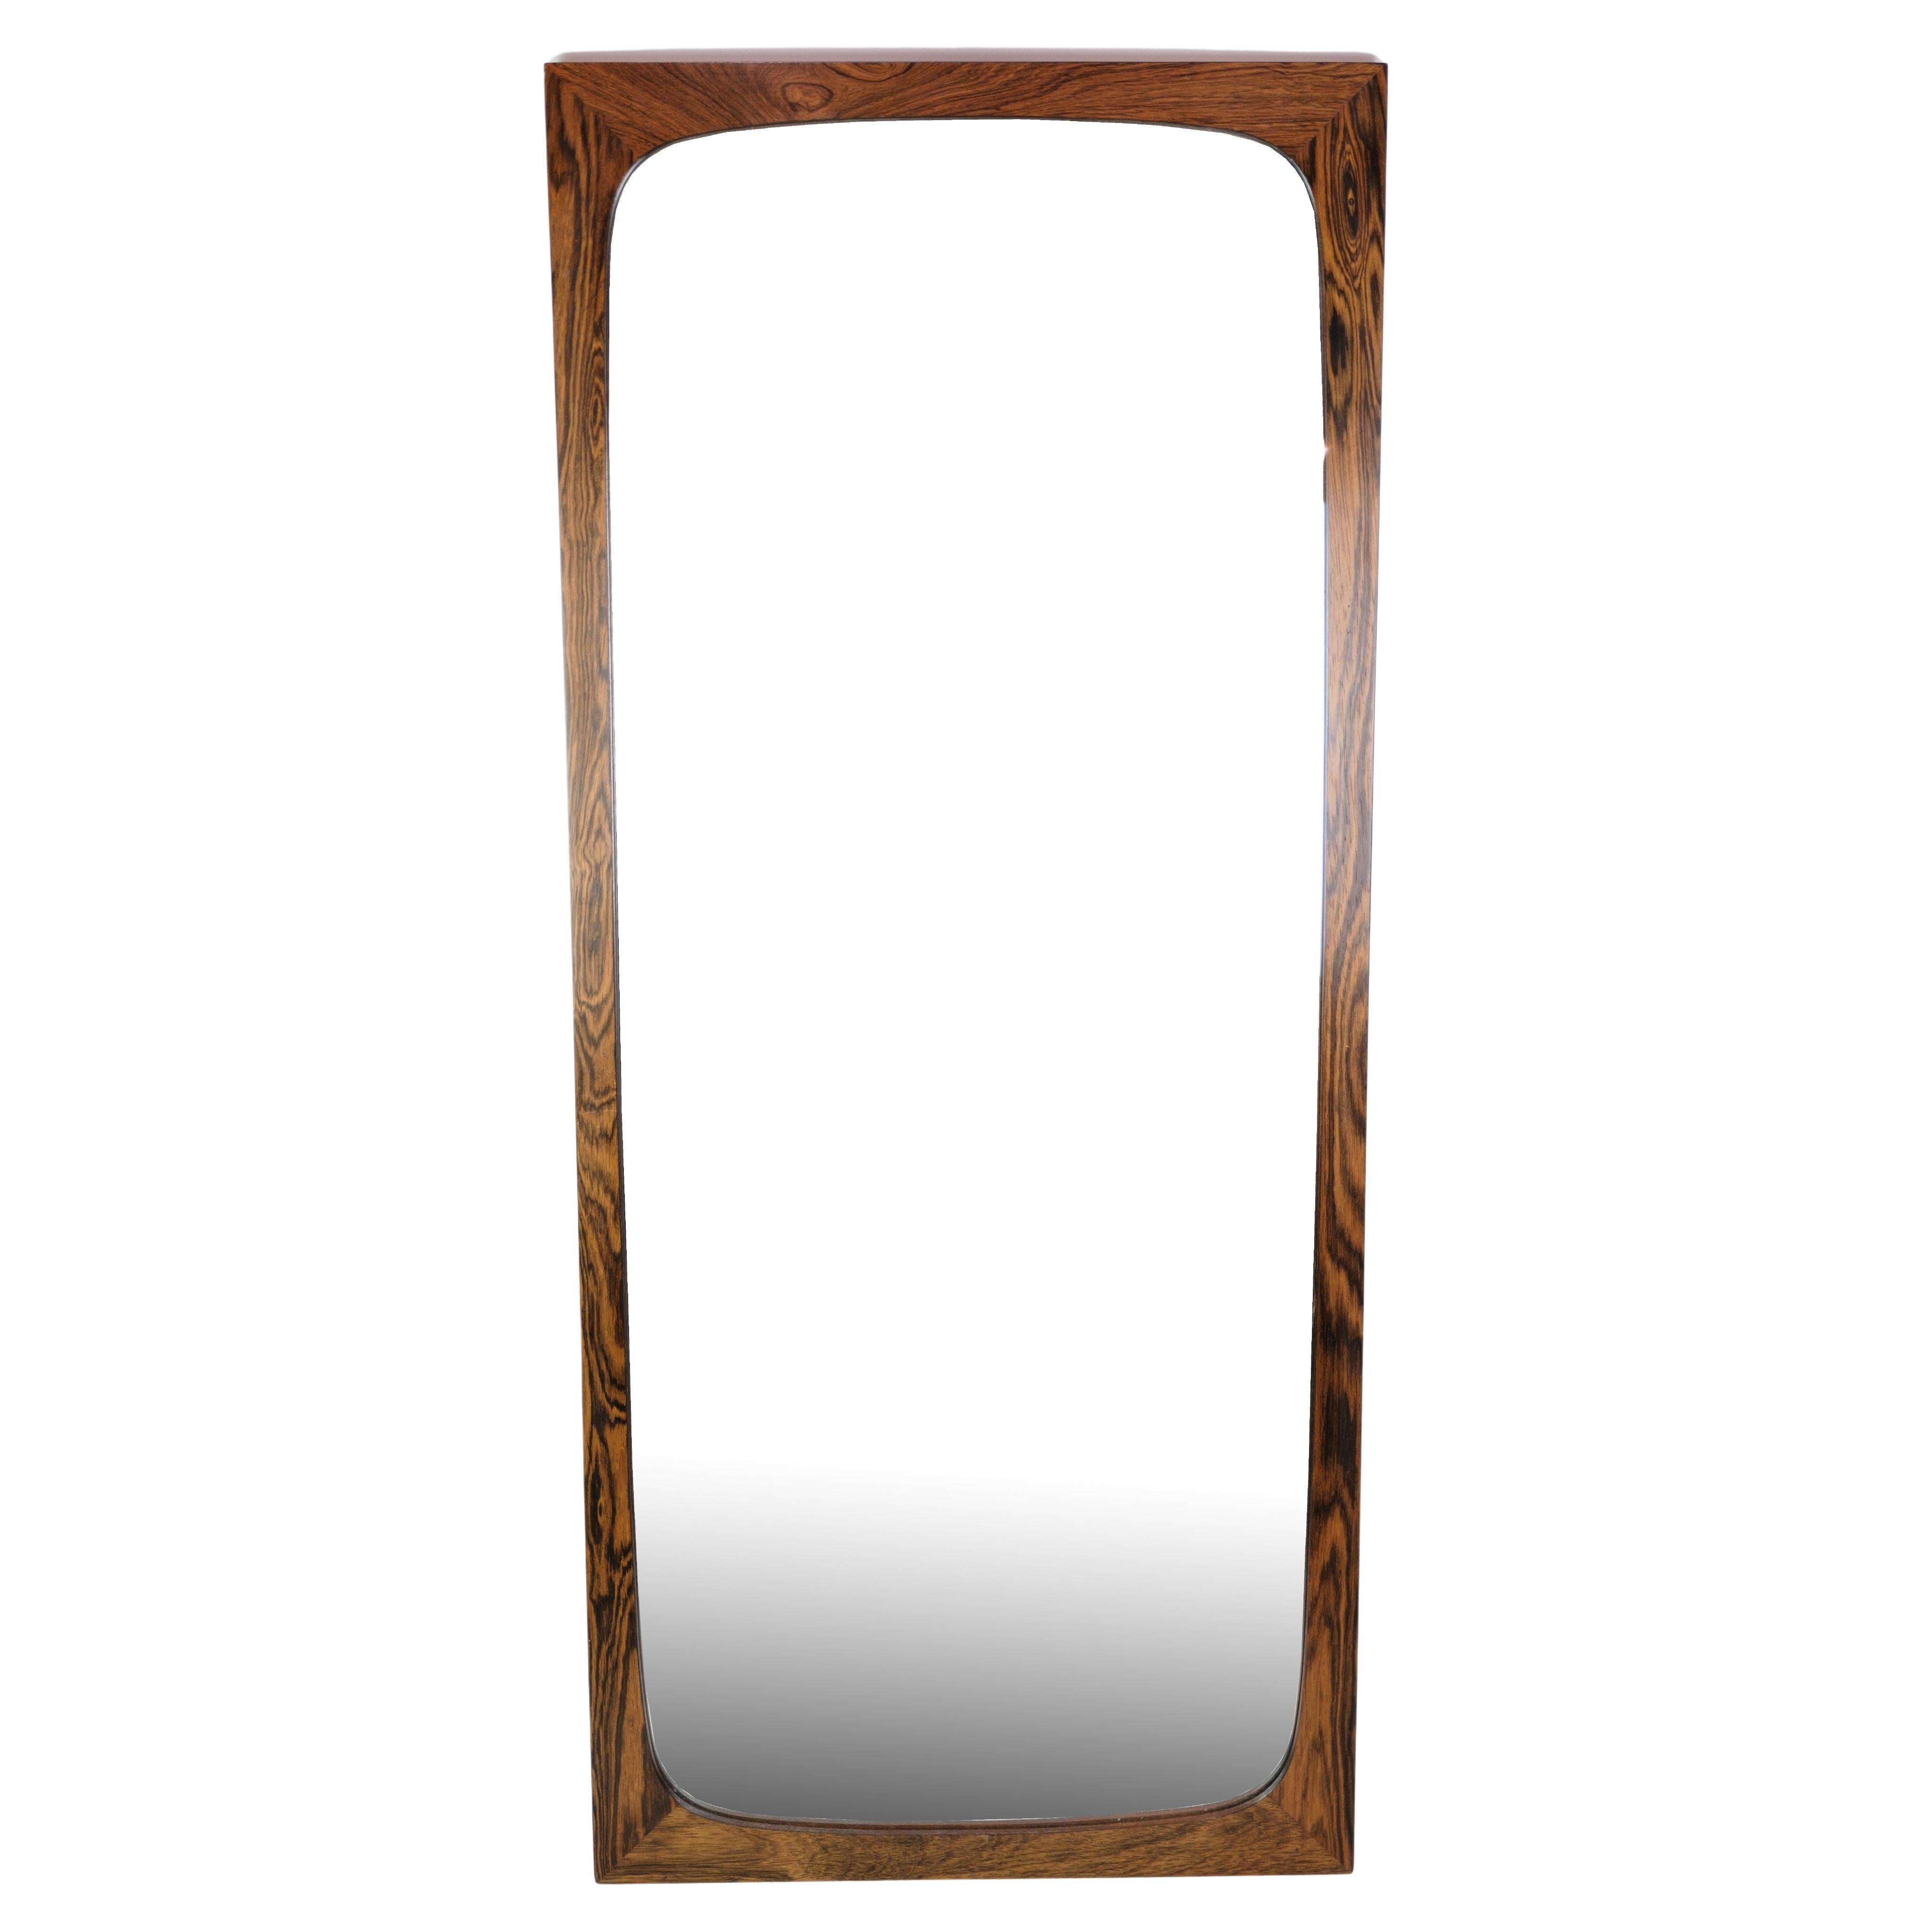 Mirror Made In Rosewood, Danish Design From 1960s For Sale